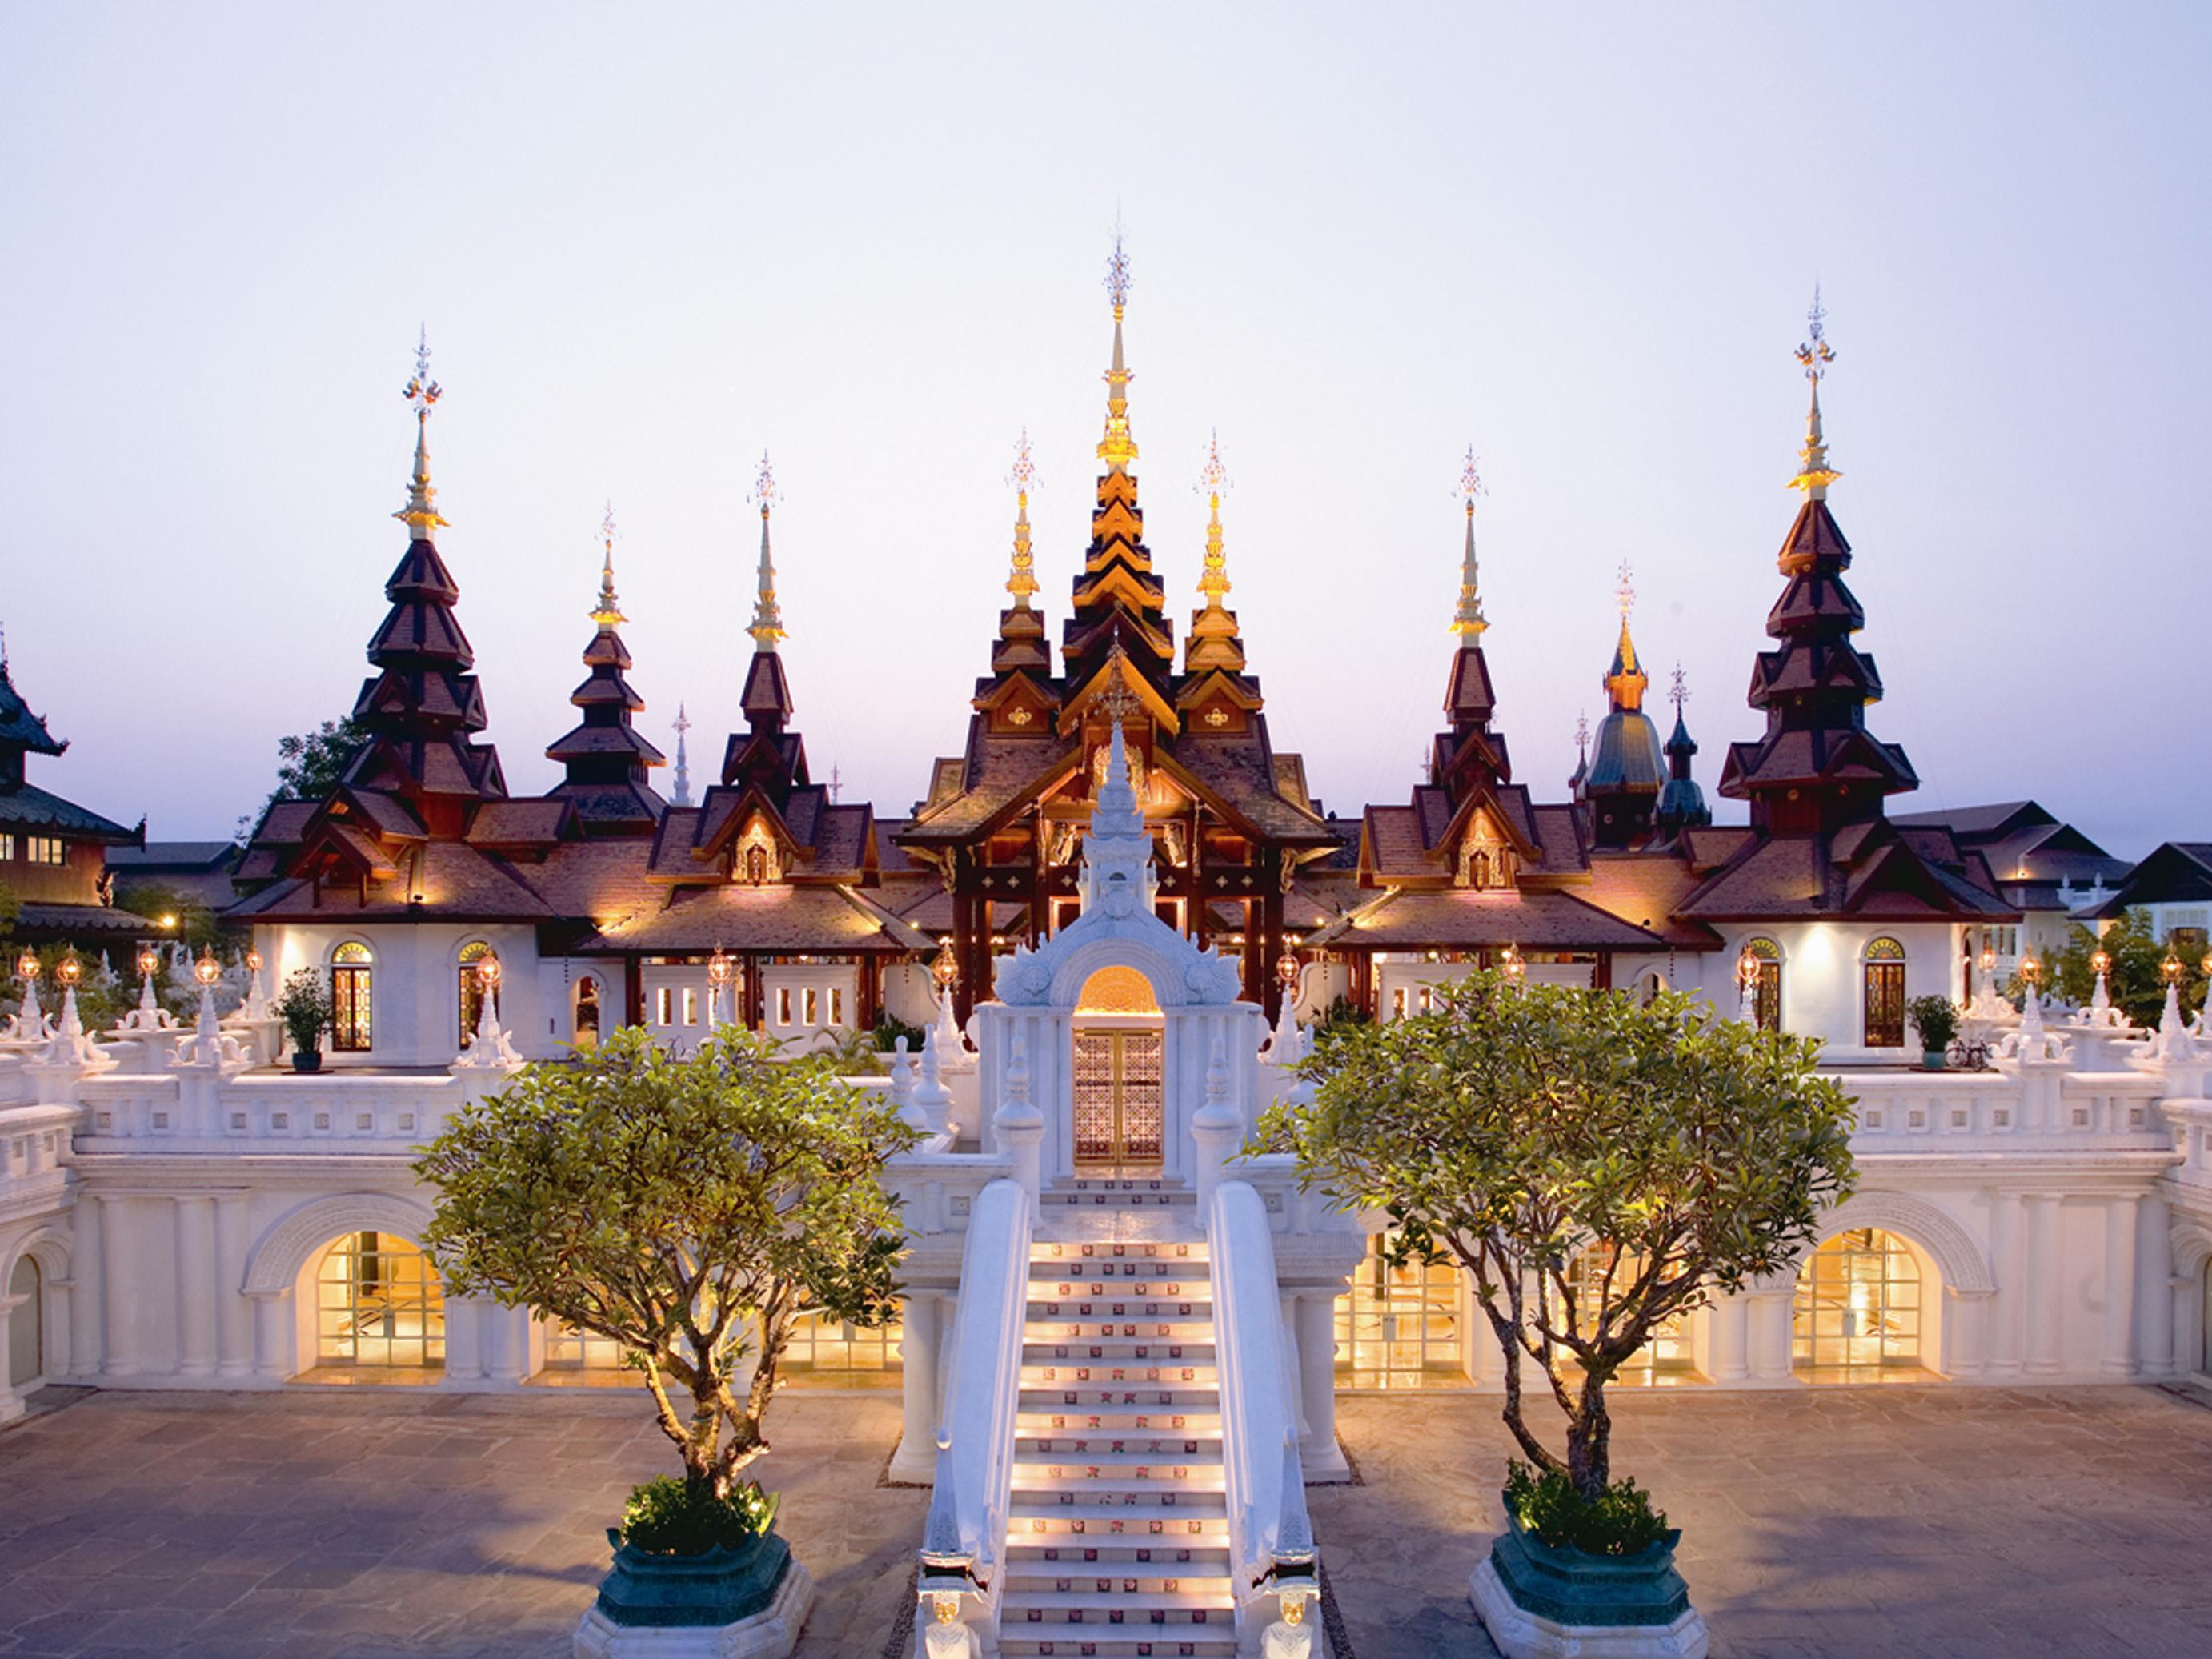 The Dhara Dhevi Hotel Chiang Mai Thailand FAQ 2017, What facilities are there in The Dhara Dhevi Hotel Chiang Mai Thailand 2017, What Languages Spoken are Supported in The Dhara Dhevi Hotel Chiang Mai Thailand 2017, Which payment cards are accepted in The Dhara Dhevi Hotel Chiang Mai Thailand , Thailand The Dhara Dhevi Hotel Chiang Mai room facilities and services Q&A 2017, Thailand The Dhara Dhevi Hotel Chiang Mai online booking services 2017, Thailand The Dhara Dhevi Hotel Chiang Mai address 2017, Thailand The Dhara Dhevi Hotel Chiang Mai telephone number 2017,Thailand The Dhara Dhevi Hotel Chiang Mai map 2017, Thailand The Dhara Dhevi Hotel Chiang Mai traffic guide 2017, how to go Thailand The Dhara Dhevi Hotel Chiang Mai, Thailand The Dhara Dhevi Hotel Chiang Mai booking online 2017, Thailand The Dhara Dhevi Hotel Chiang Mai room types 2017.